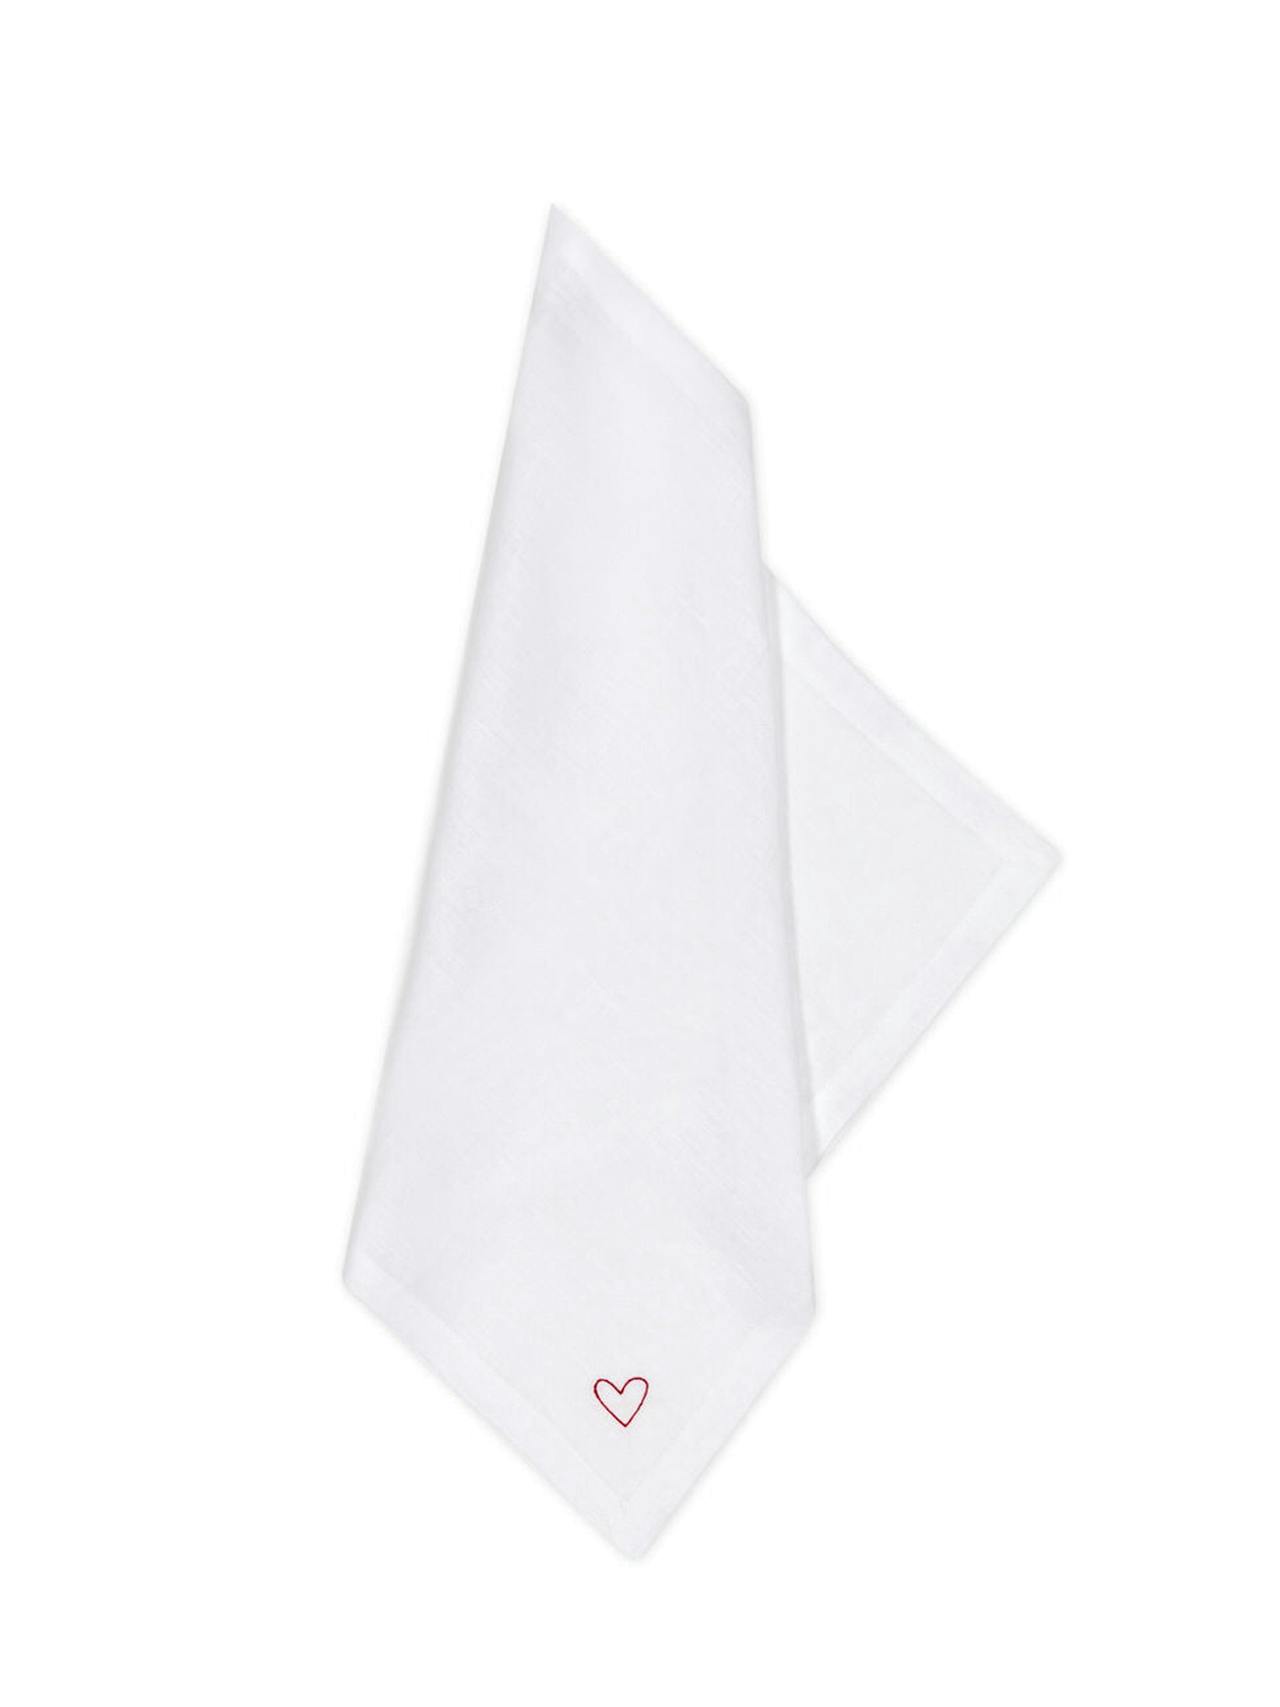 Embroidered heart napkins, set of 4